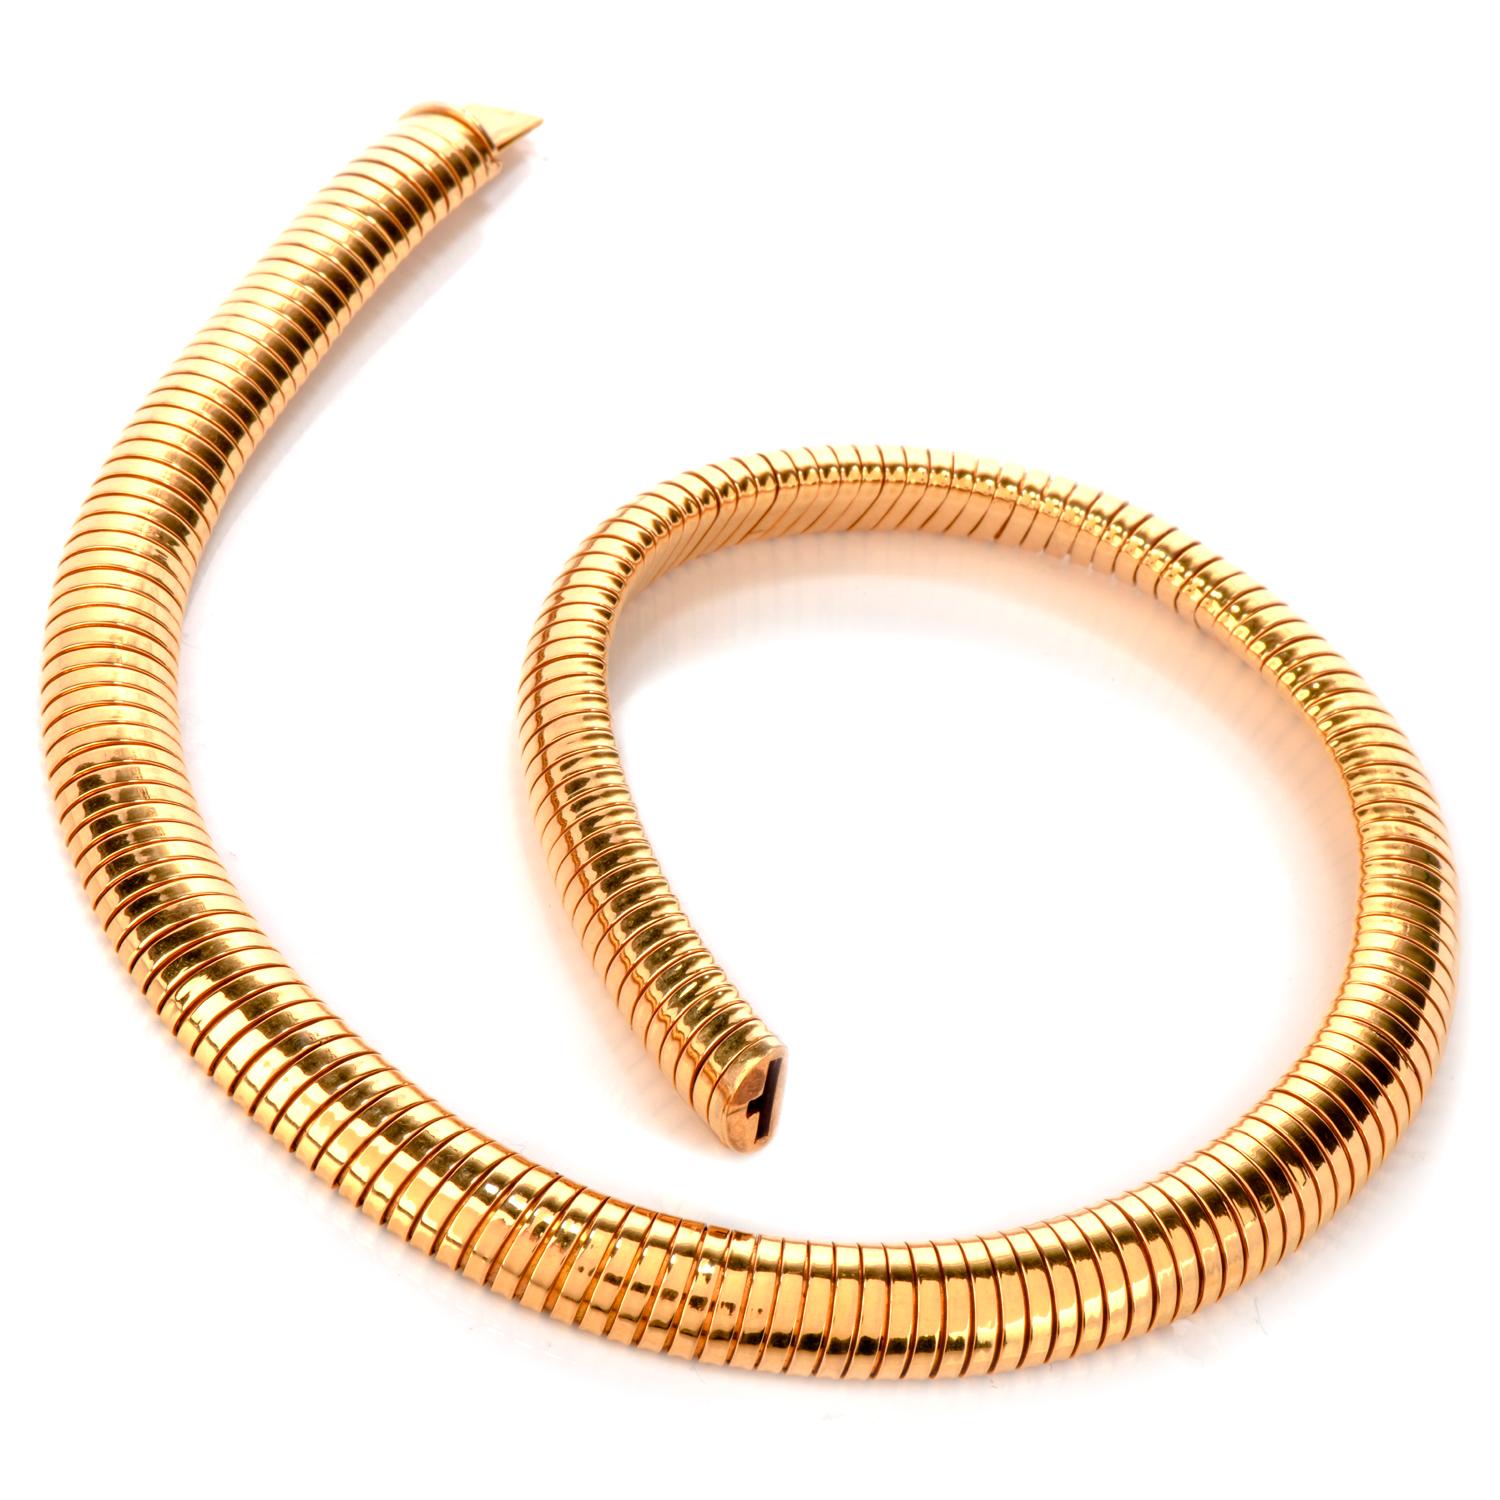 Be strikingly beautiful with Vintage 1950's retro 18K Yellow Gold Flexible Collar Necklace! 

This stetchable and comfortable 16” long and 10mm wide necklace is made from 18 karat yellow gold.  Weighing in at 56.8 Grams and with an insert clasp with